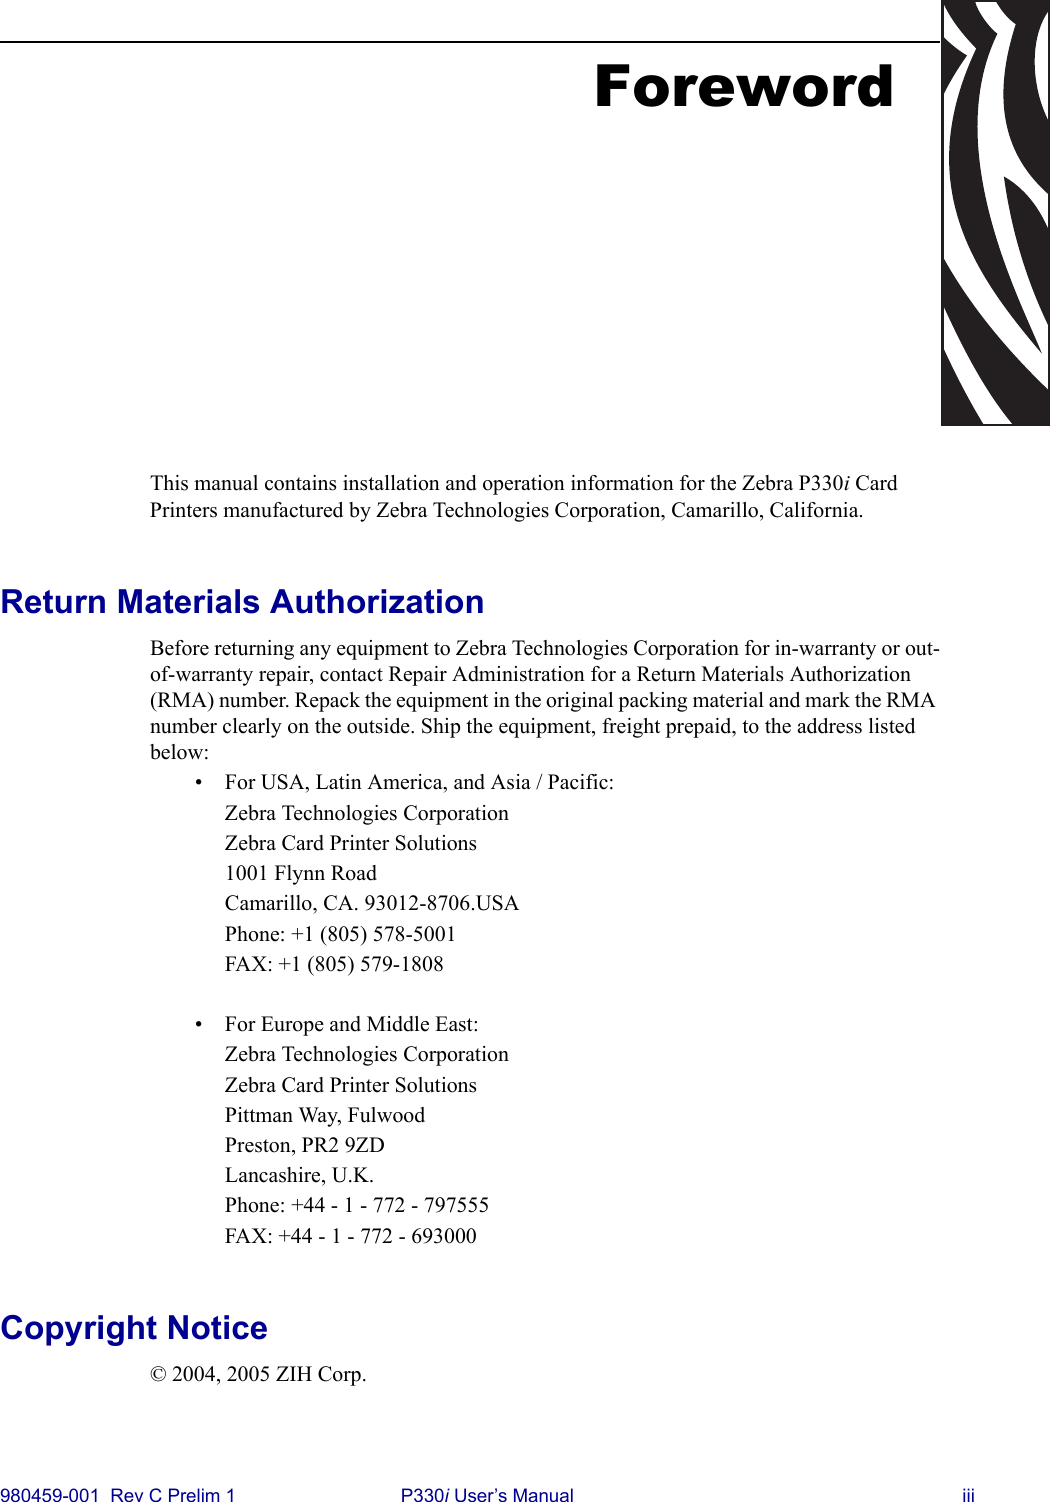 980459-001  Rev C Prelim 1 P330i User’s Manual iiiForewordThis manual contains installation and operation information for the Zebra P330i Card Printers manufactured by Zebra Technologies Corporation, Camarillo, California.Return Materials AuthorizationBefore returning any equipment to Zebra Technologies Corporation for in-warranty or out-of-warranty repair, contact Repair Administration for a Return Materials Authorization (RMA) number. Repack the equipment in the original packing material and mark the RMA number clearly on the outside. Ship the equipment, freight prepaid, to the address listed below:• For USA, Latin America, and Asia / Pacific:Zebra Technologies CorporationZebra Card Printer Solutions1001 Flynn RoadCamarillo, CA. 93012-8706.USAPhone: +1 (805) 578-5001FAX: +1 (805) 579-1808• For Europe and Middle East:Zebra Technologies CorporationZebra Card Printer SolutionsPittman Way, FulwoodPreston, PR2 9ZDLancashire, U.K.Phone: +44 - 1 - 772 - 797555FAX: +44 - 1 - 772 - 693000Copyright Notice© 2004, 2005 ZIH Corp.